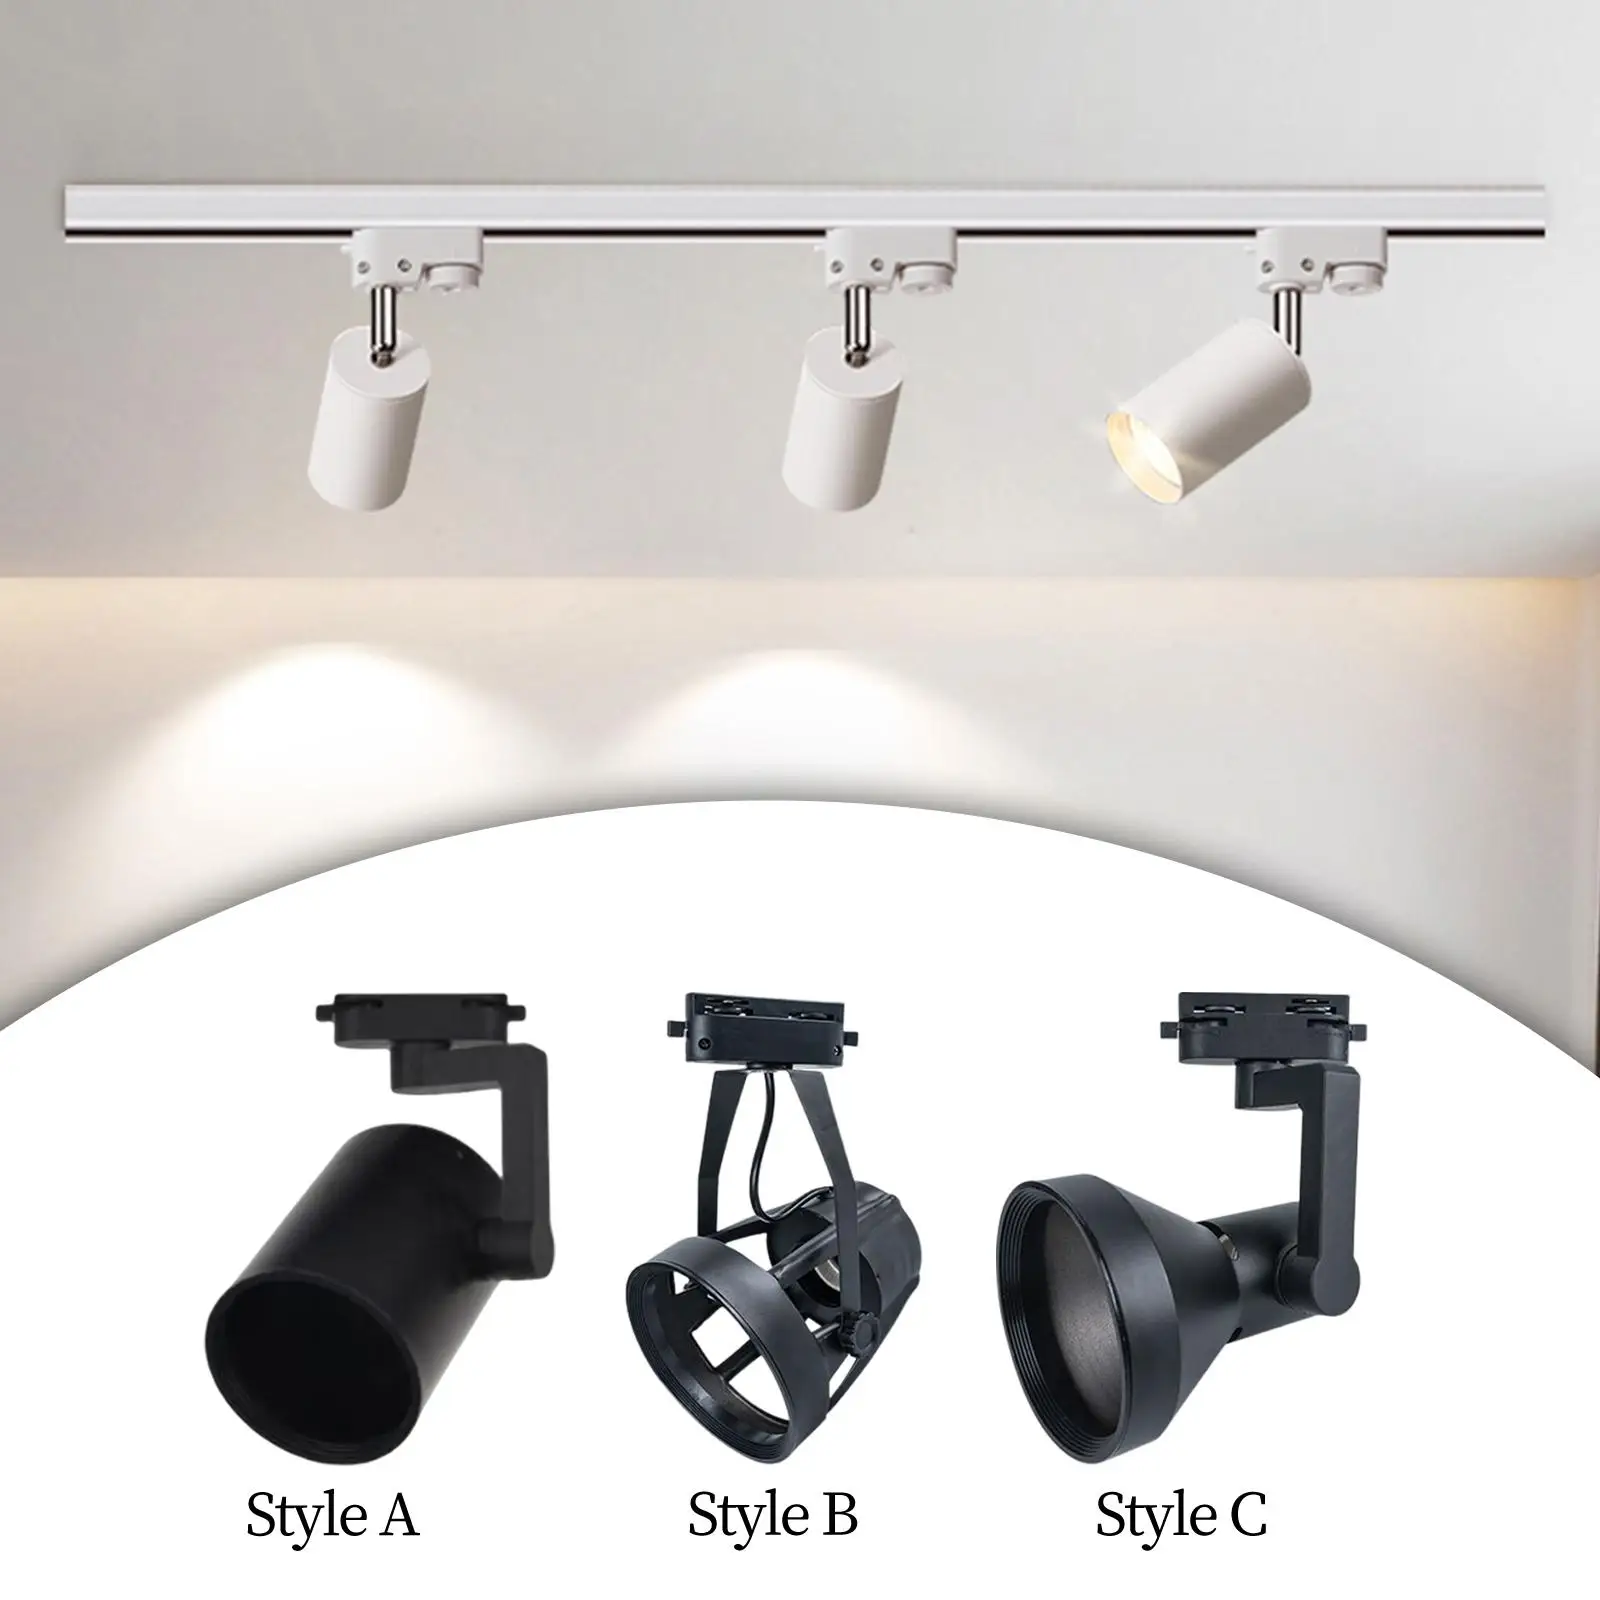 Par30 LED Track Light Shade Cover Bracket E27 Base Black Easily Install for Hotel Supermarket and Office Painted Surface Durable